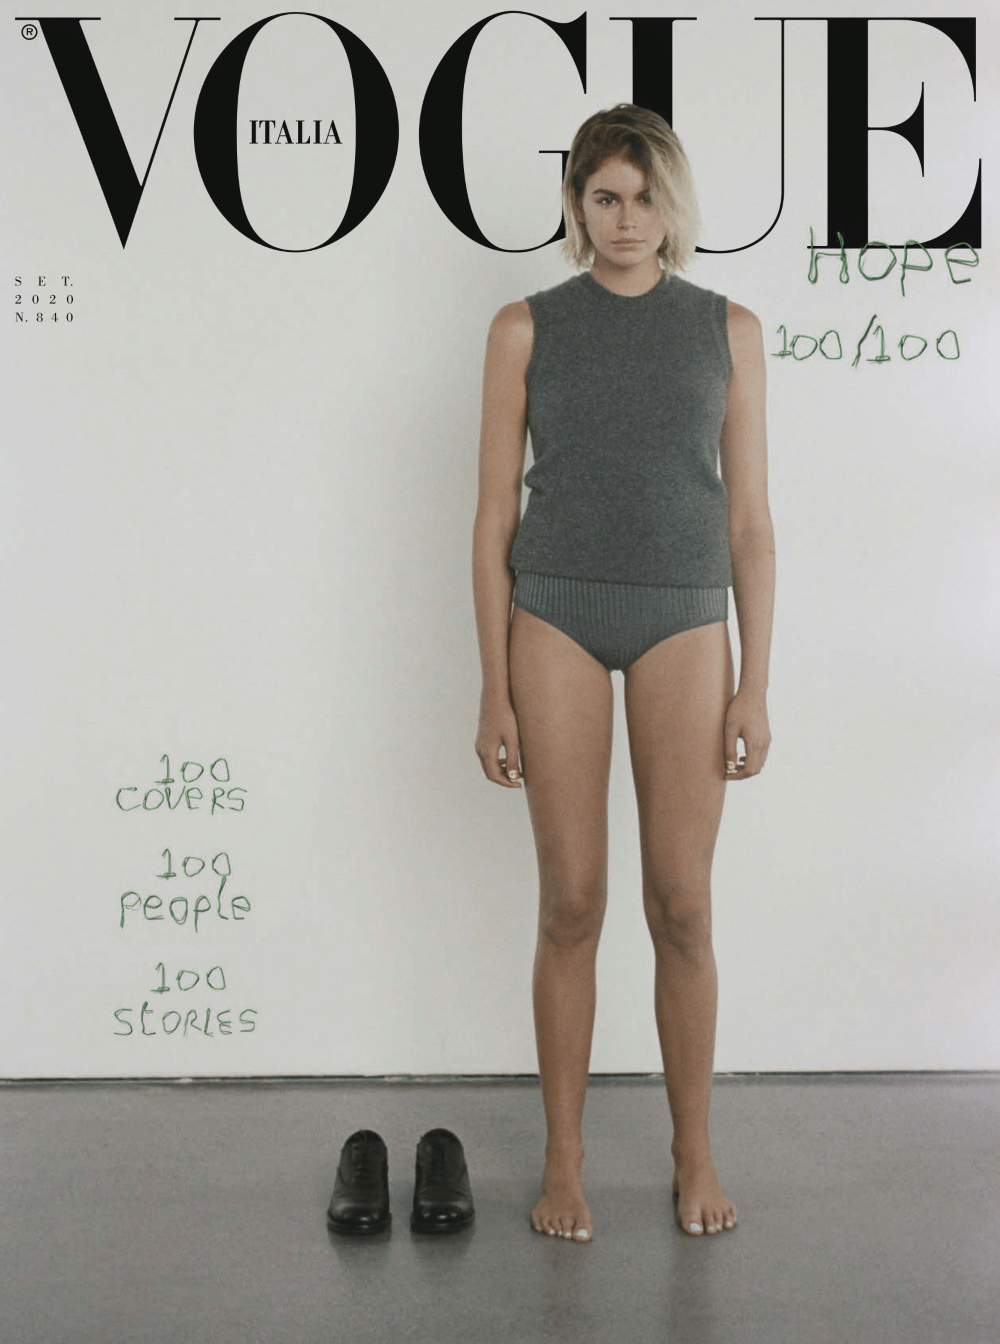 Vogue Italia taps 100 personalities for September 2020 issue